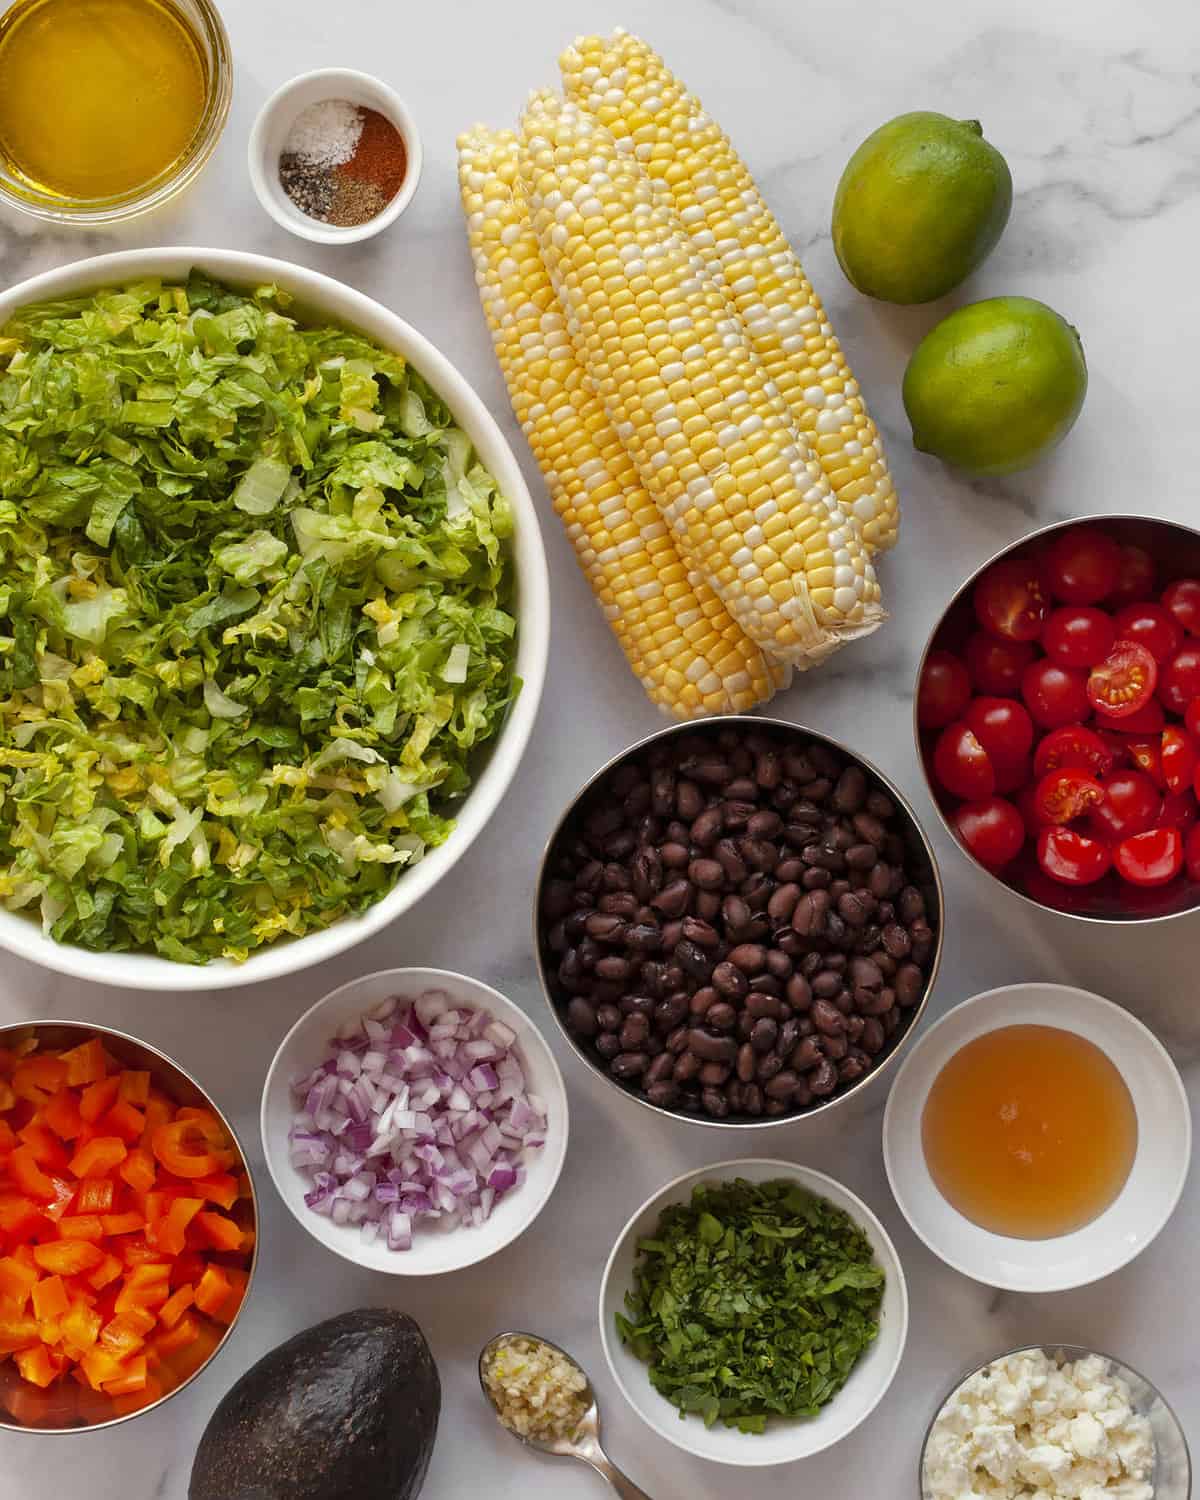 Ingredients including romaine, corn, black beans, tomatoes, peppers, onions, limes, tomatoes, oil and spices.